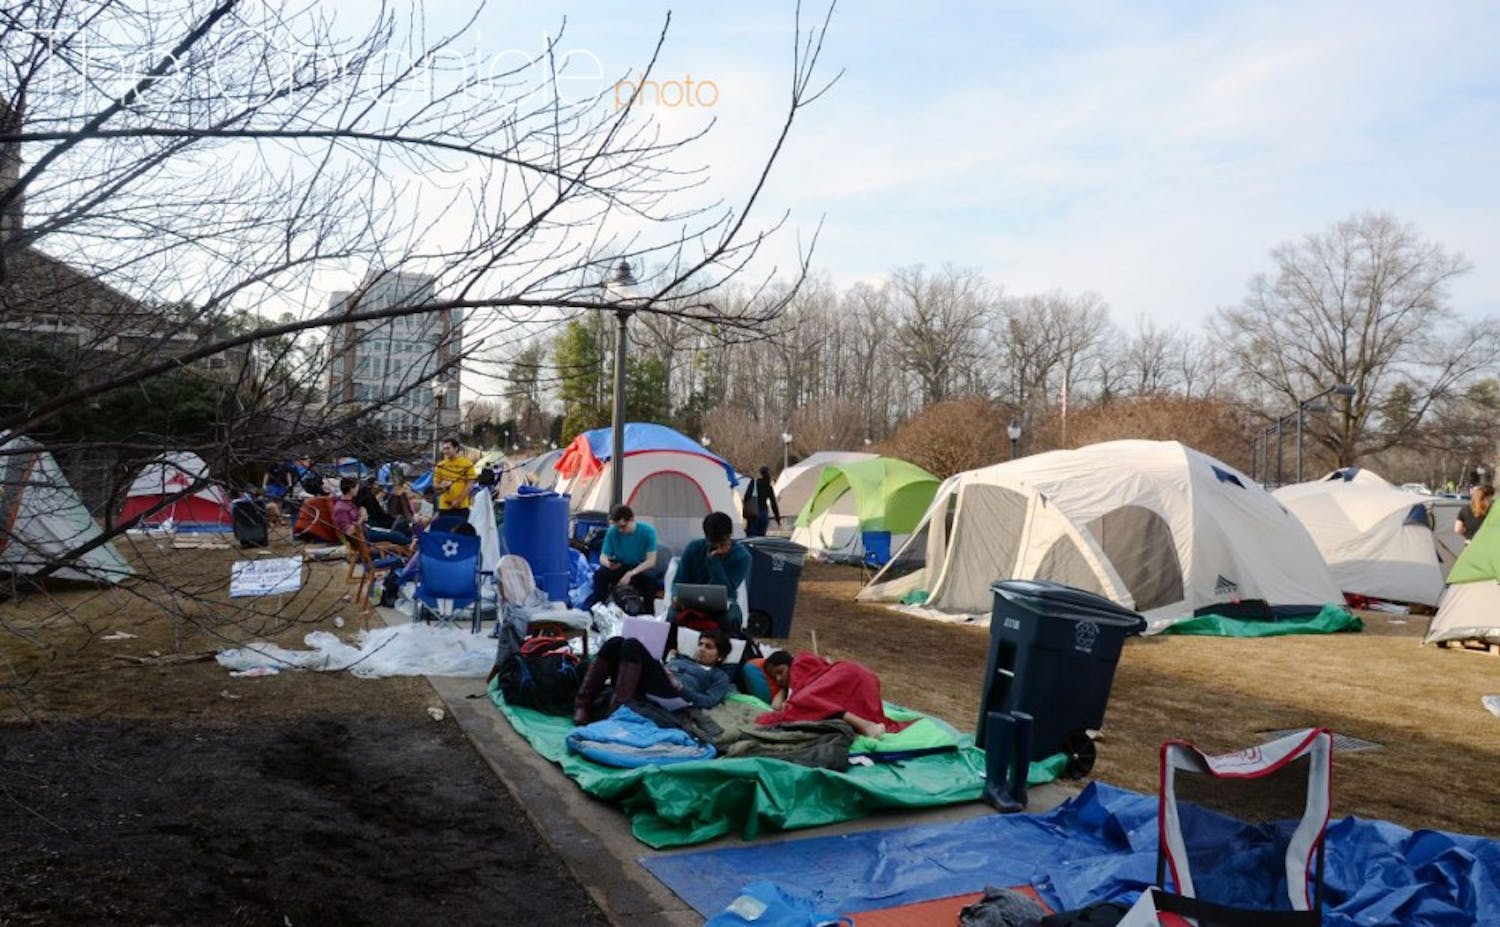 The number of total tents is still expected to be capped at 100 at this time to allow for students to get in to the North Carolina game via the walk-up line.&nbsp;